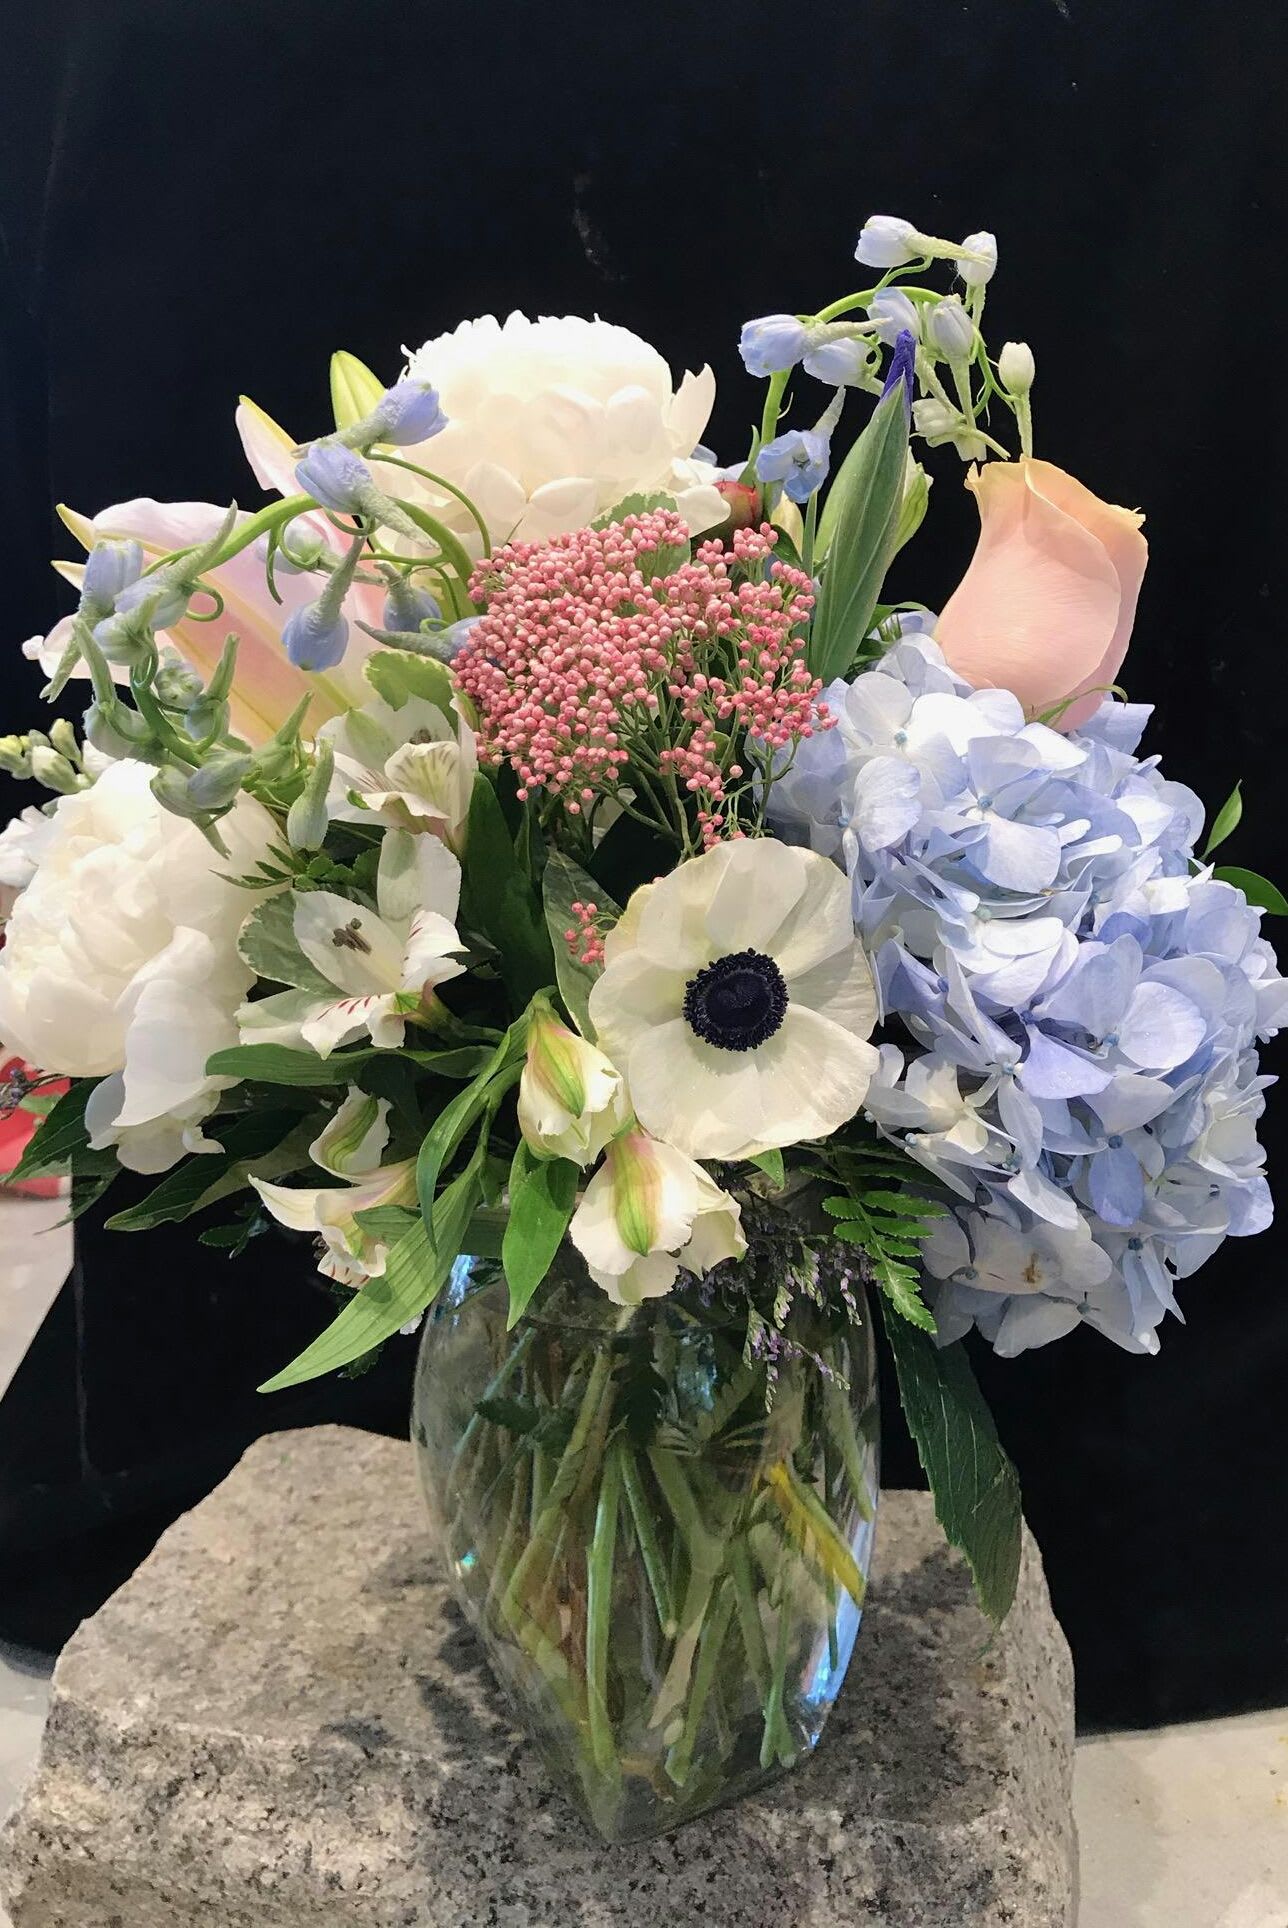 Breezy Day in Wellfleet - This easy, breezy design was created by Danielle at our shop, who has a cottage in Wellfleet.  She has captured the relaxing, easy, mood we so often feel while relaxing on Cape Cod.  I can just see this arrangement at the cottage.  So pretty, casual and perfect!